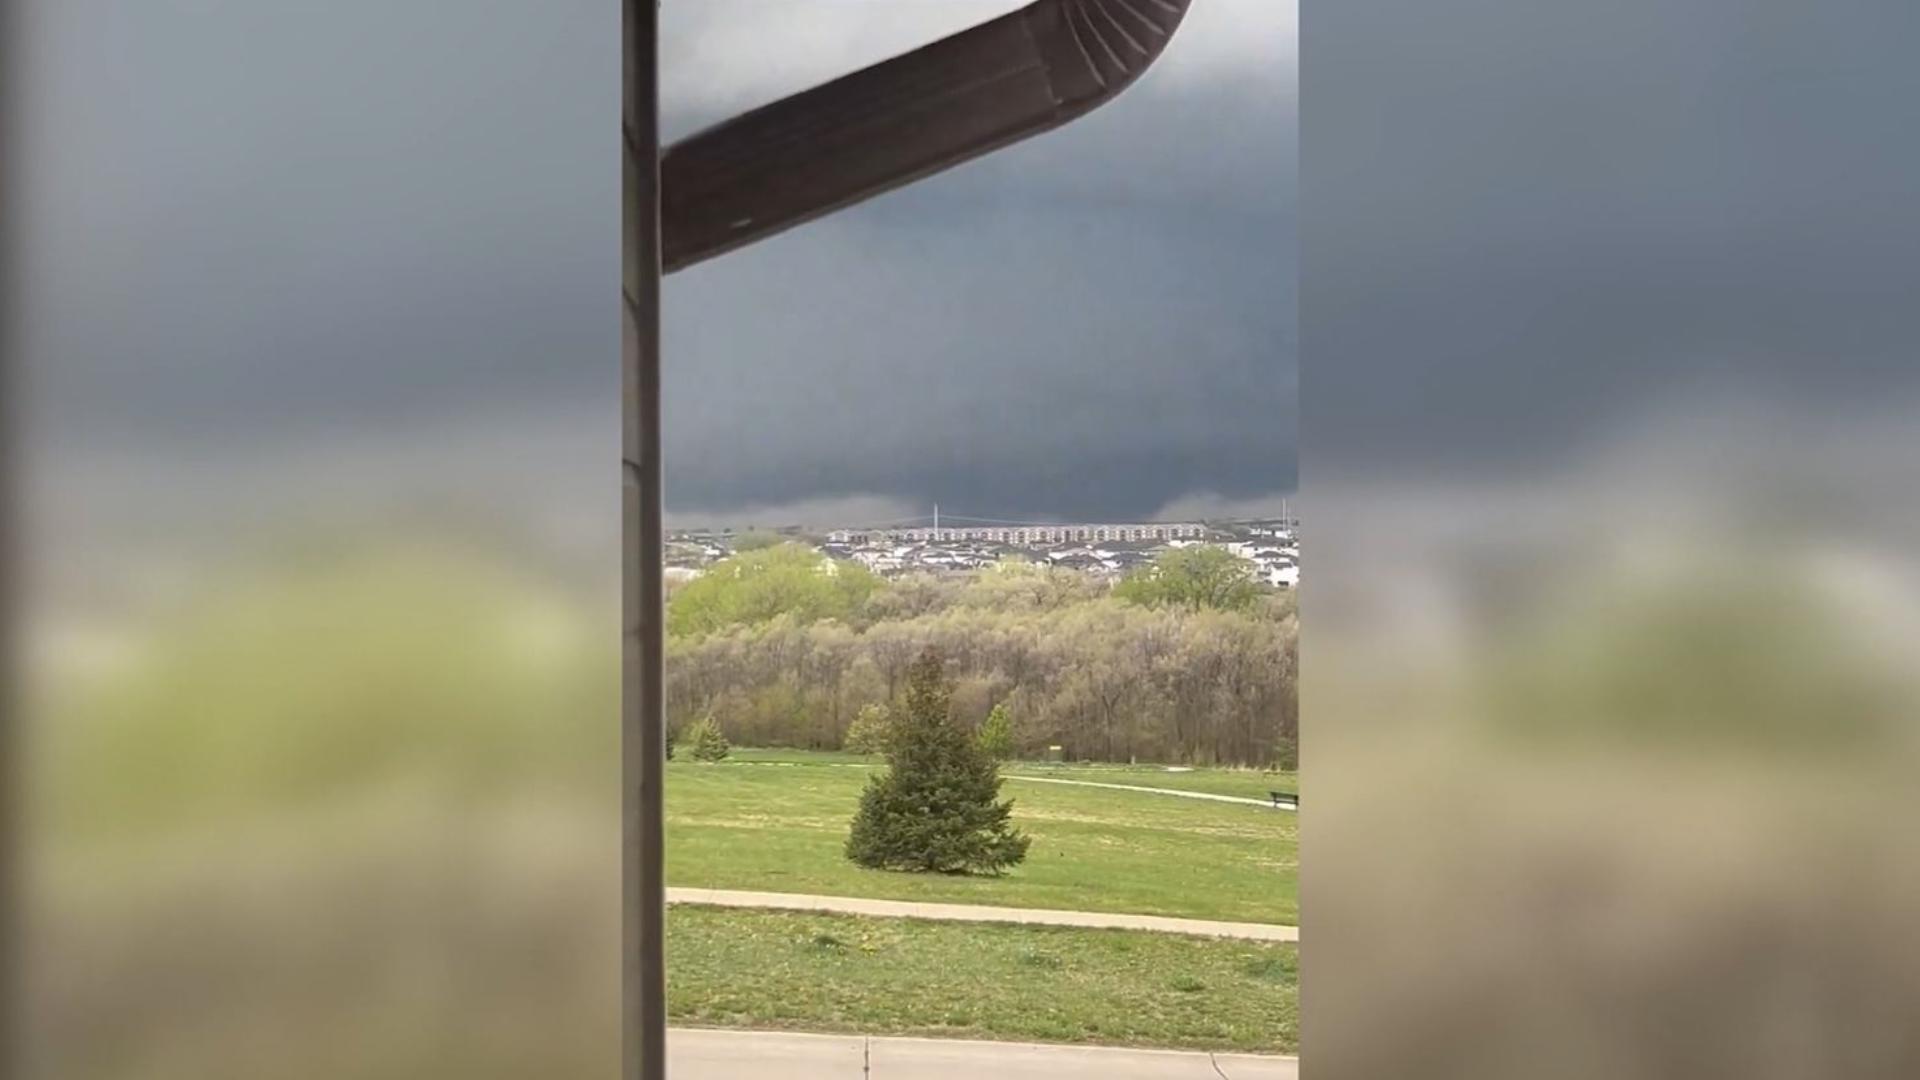 Tornadoes hit parts of eastern Nebraska as severe weather went through the area. A tornado in Elkhorn was captured on video on April 26.